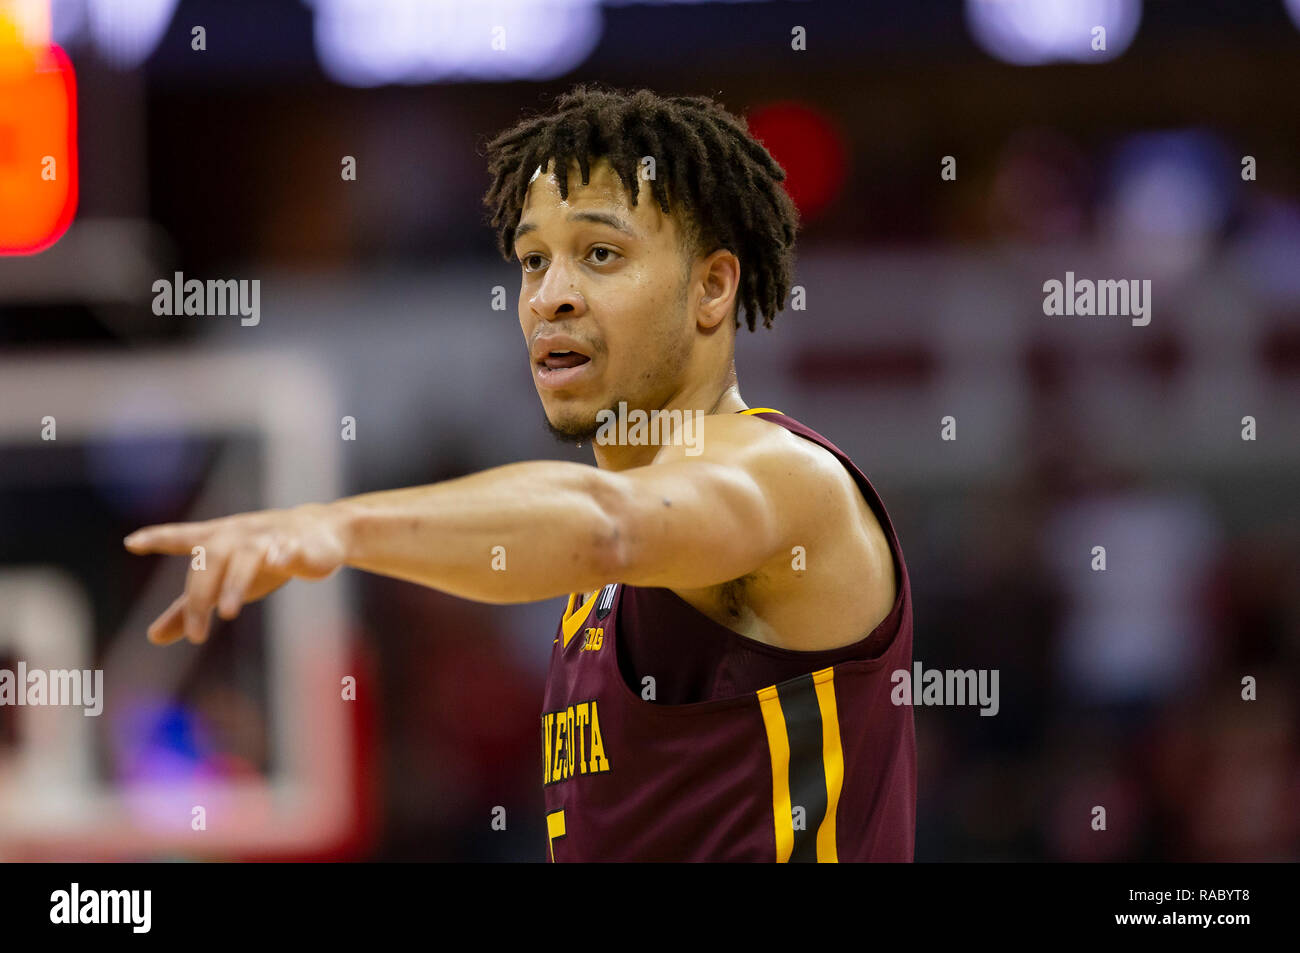 Madison, WI, USA. 3rd Jan, 2019. Minnesota Golden Gophers guard Amir Coffey #5 led the Gophers with 21 points during the NCAA Basketball game between the Minnesota Golden Gophers and the Wisconsin Badgers at the Kohl Center in Madison, WI. John Fisher/CSM/Alamy Live News Stock Photo